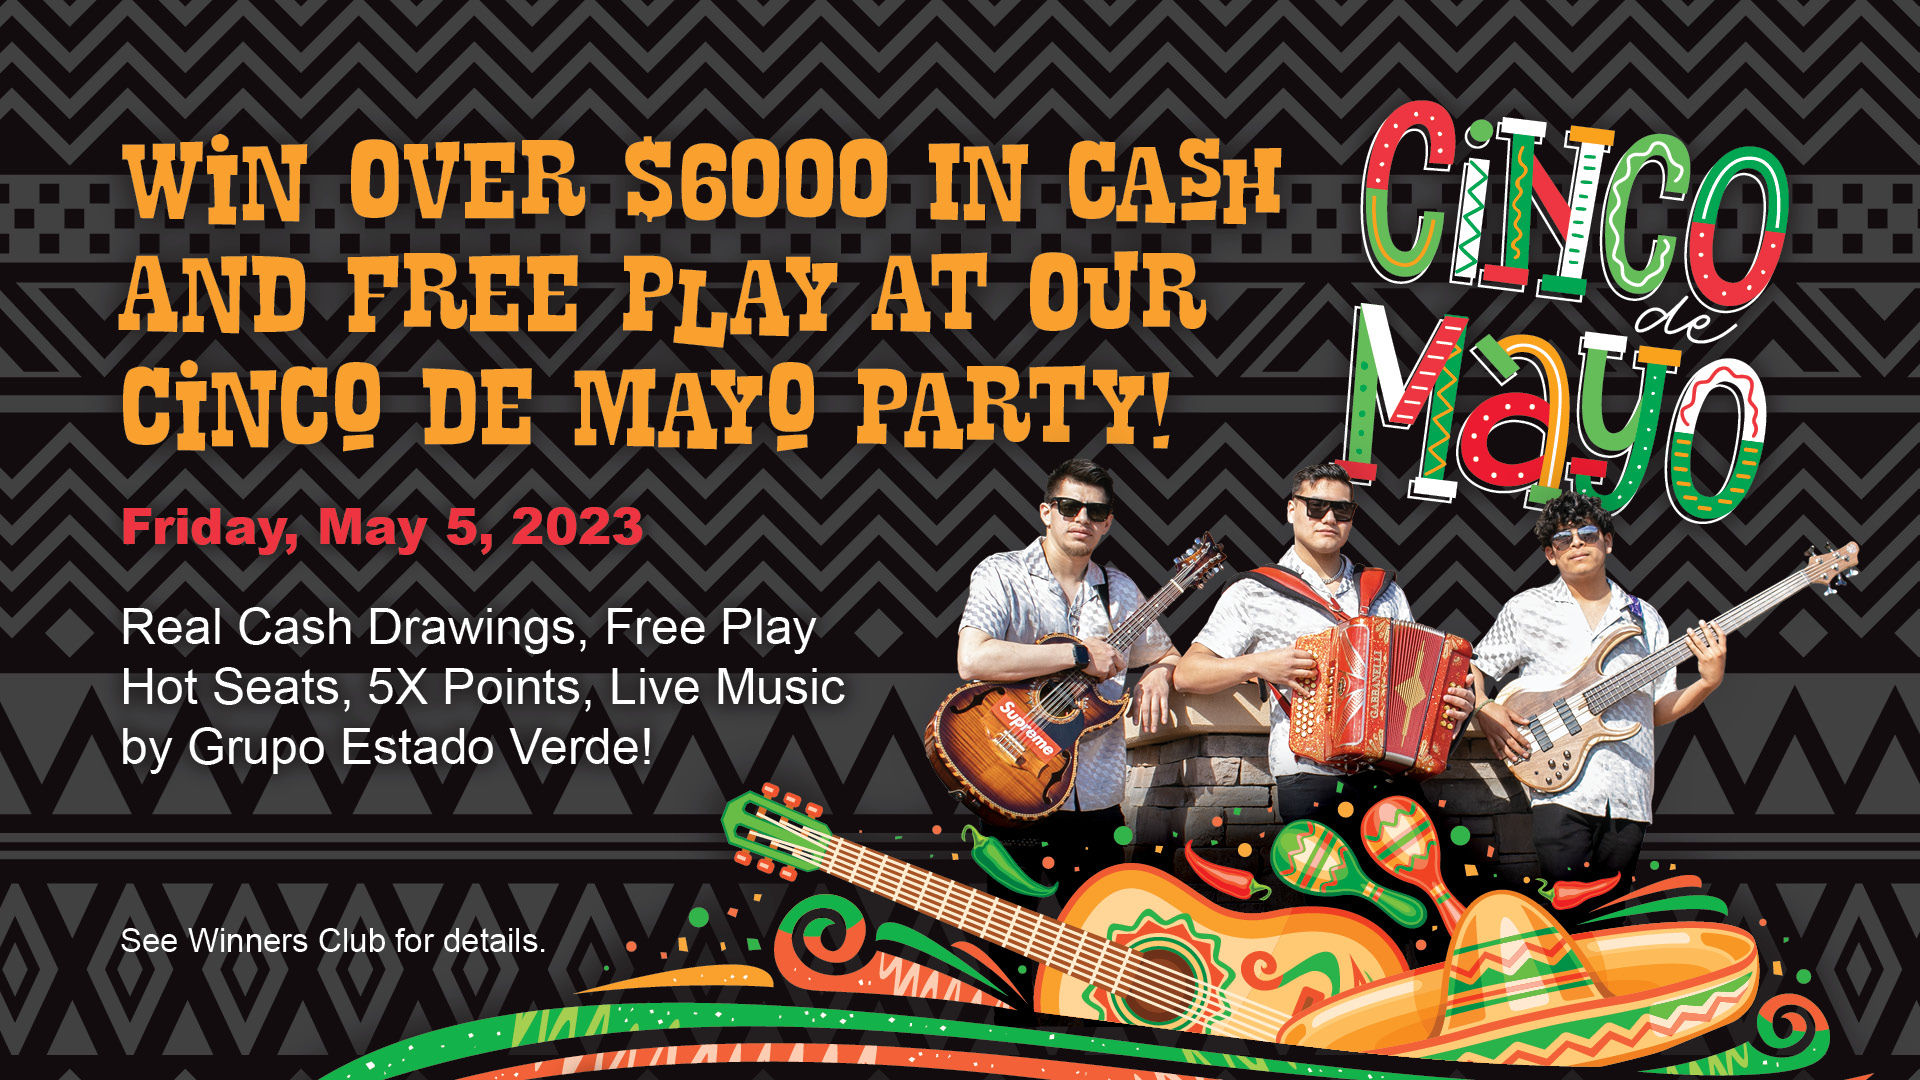 Cinco de Mayo - win over $6000 in cash and free play at our Cinco de Mayo Party! Friday, May 5, 2023. Real cash drawings, free play hot seats, 5x points, live music by Grupo Estado Verde! See Winners Club for details.